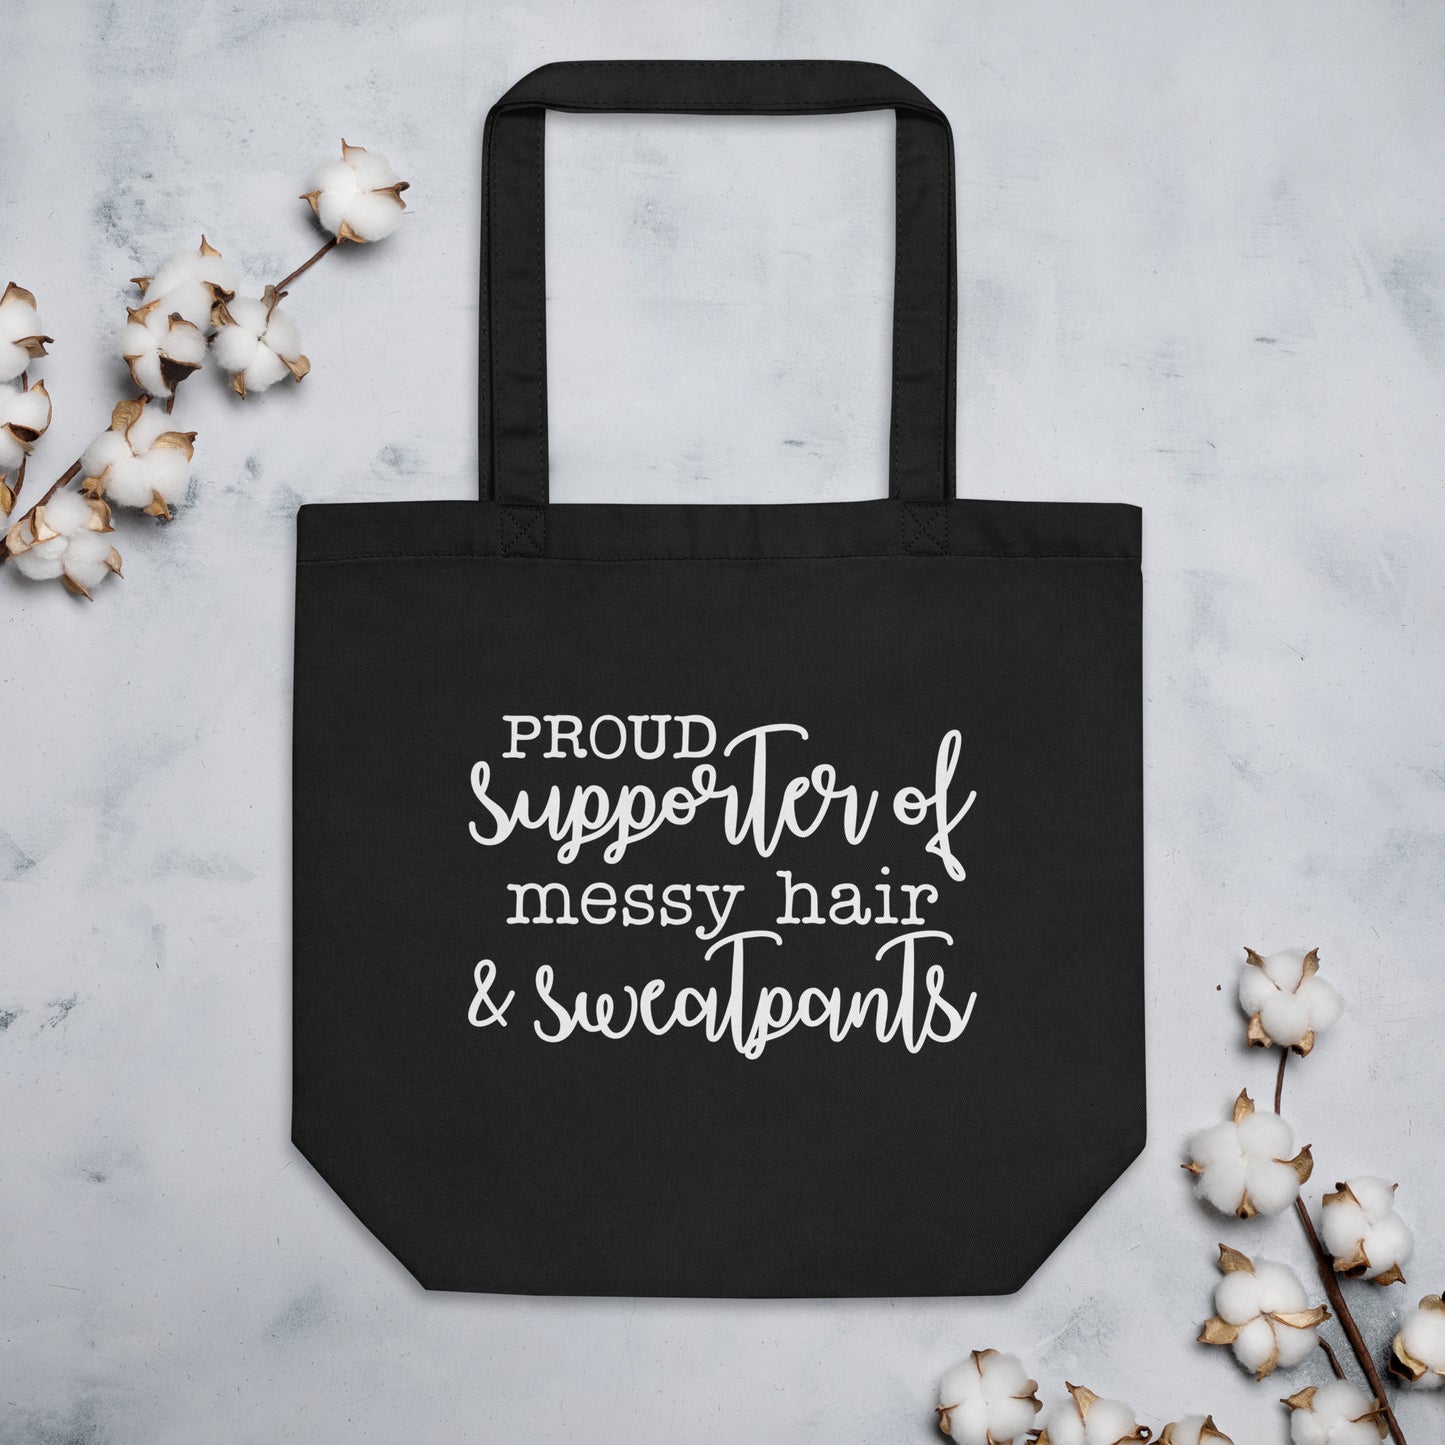 Proud Supporter of Messy Hair & Sweatpants Eco Tote Bag